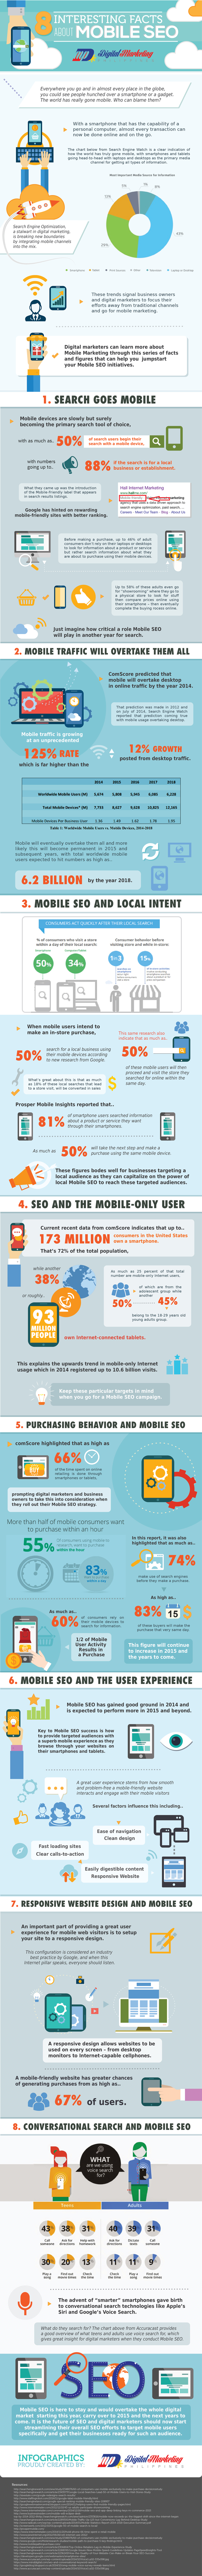 infographie-a-savoir-referencement-mobile